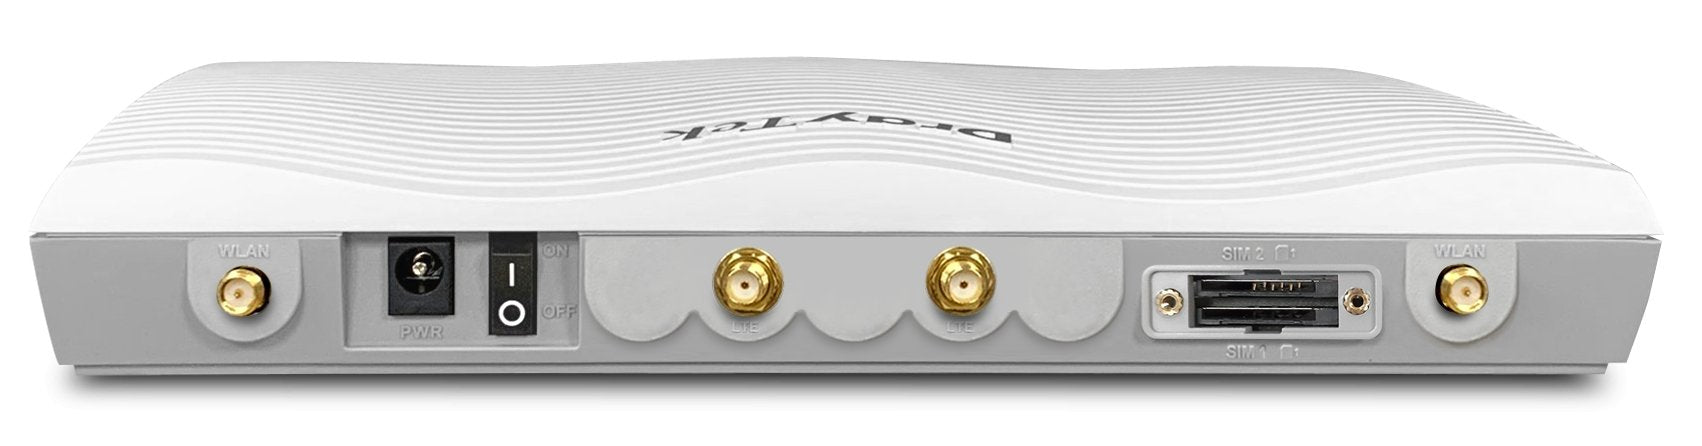 DrayTek 2865LAC Multi-WAN Firewall VPN Router AC1300 4G/LTE Modem Front View with No Anntennas Connected